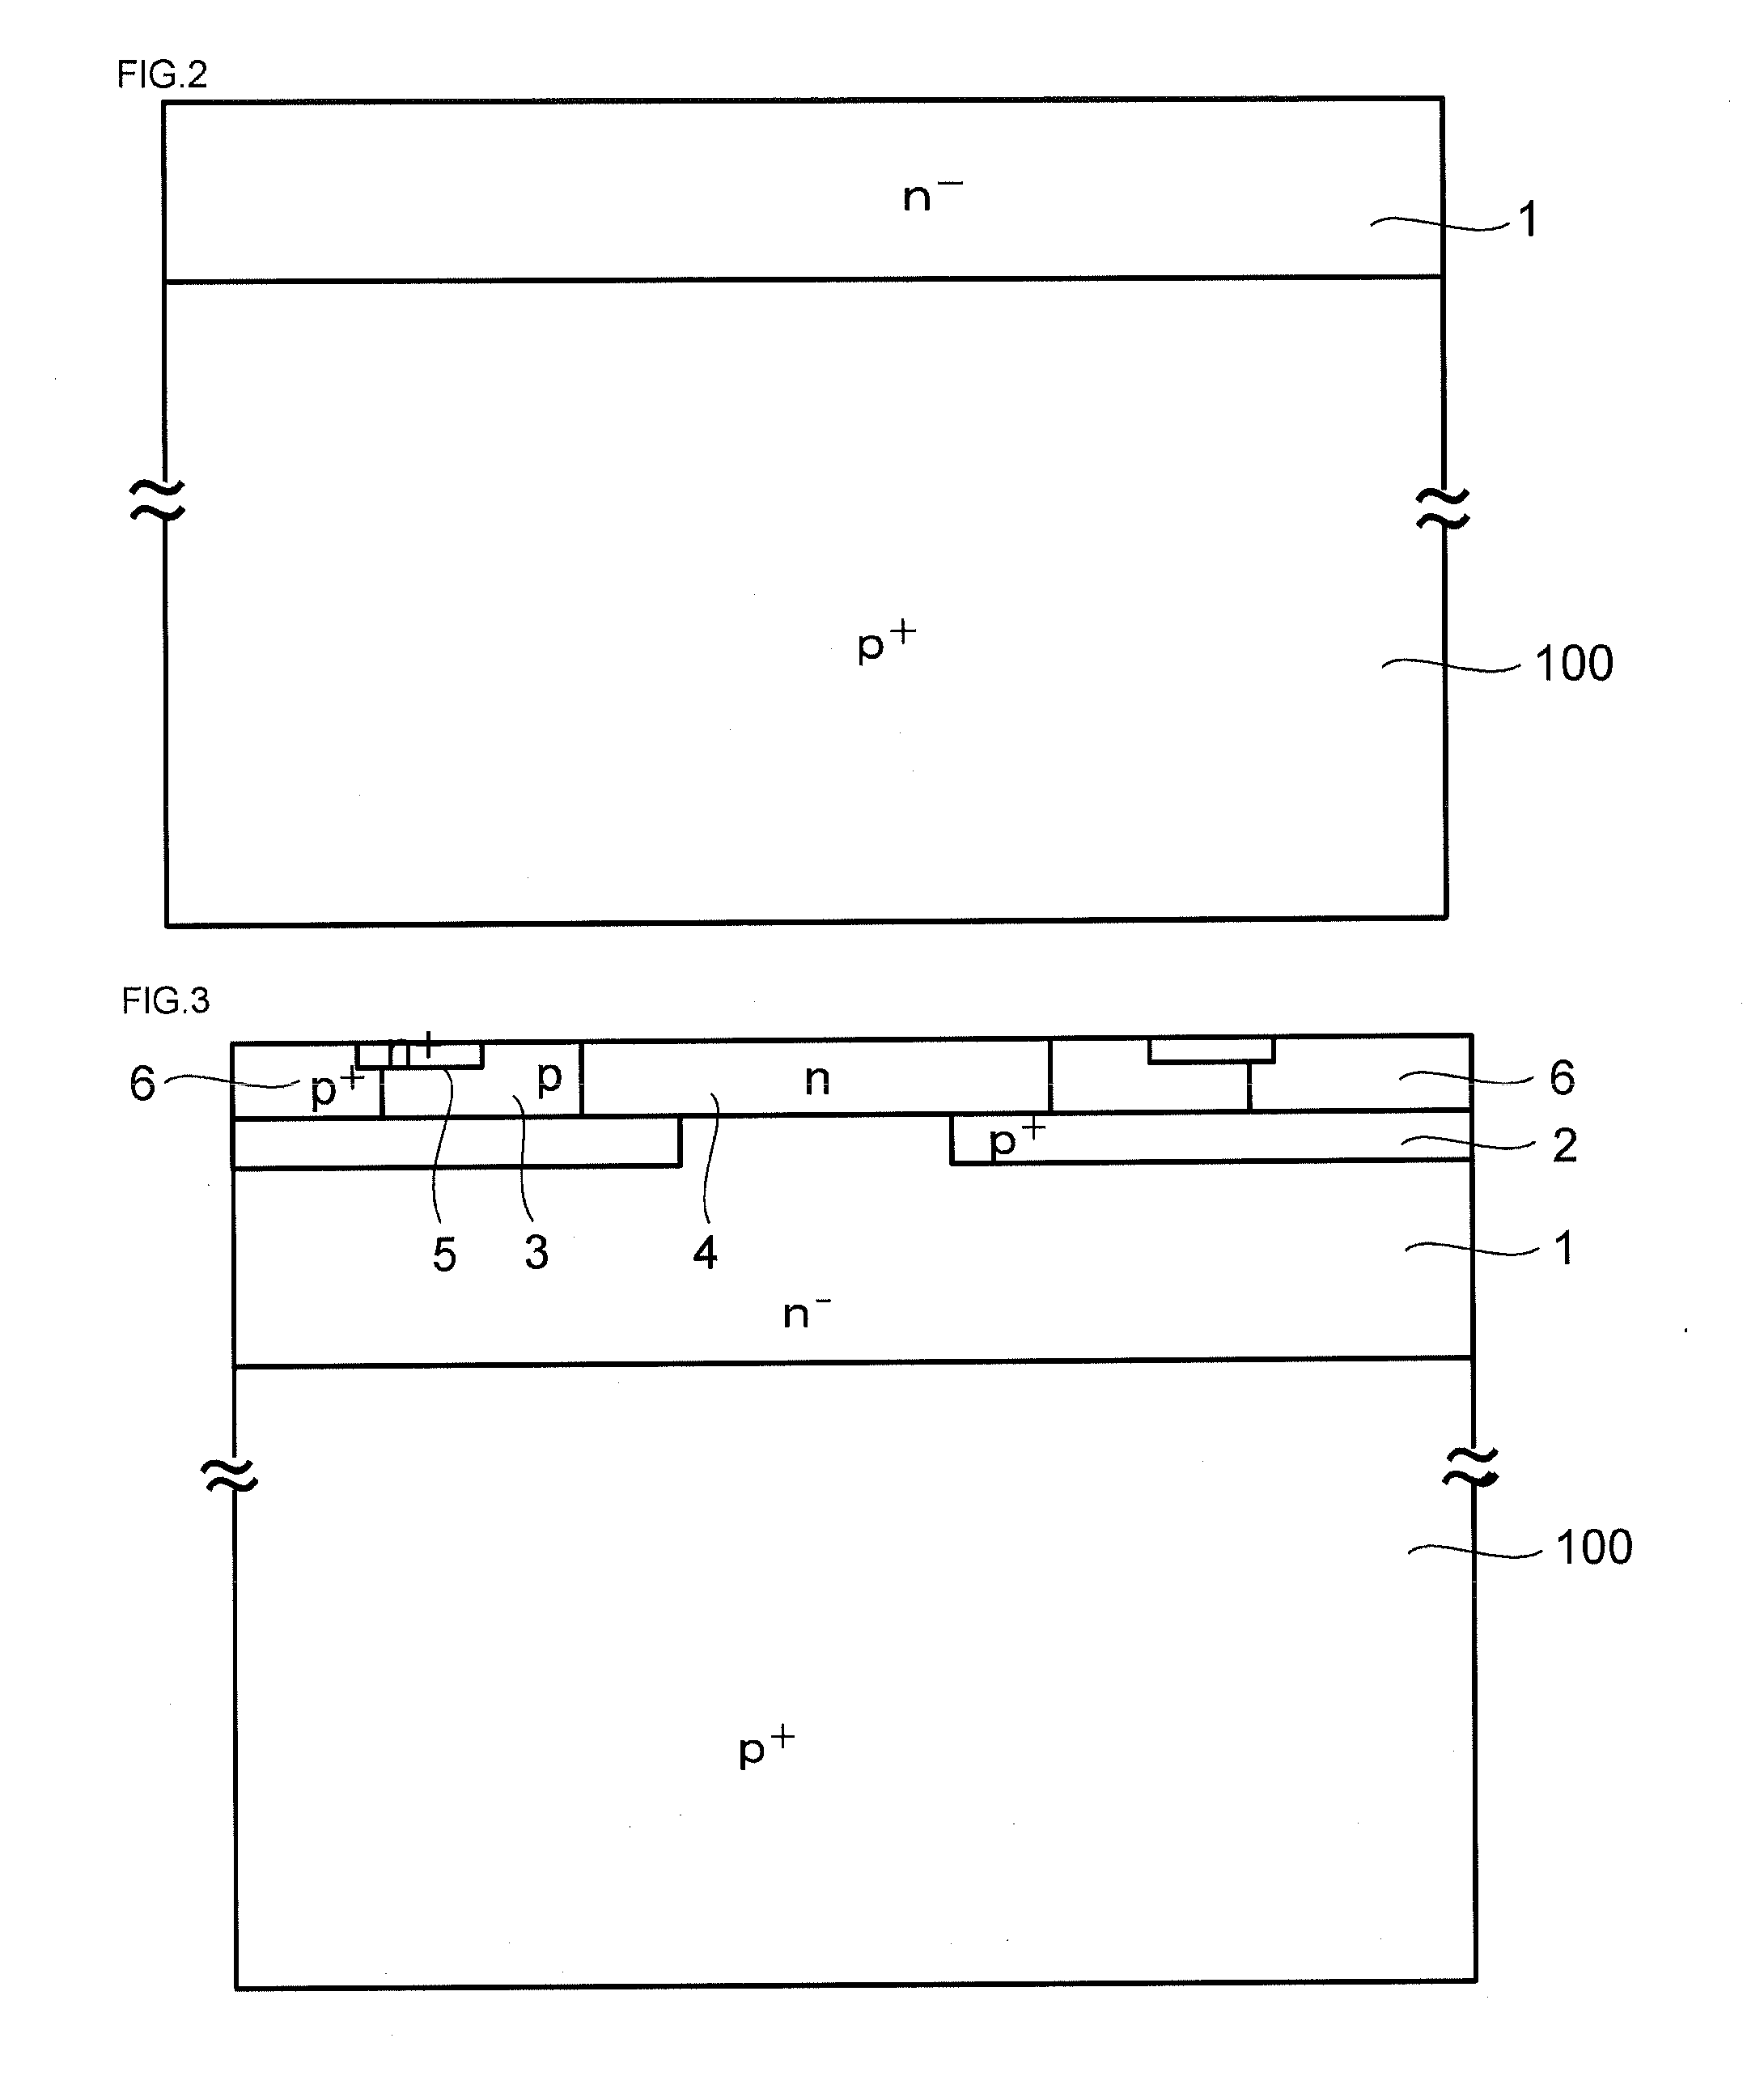 Wide-band-gap reverse-blocking MOS-type semiconductor device